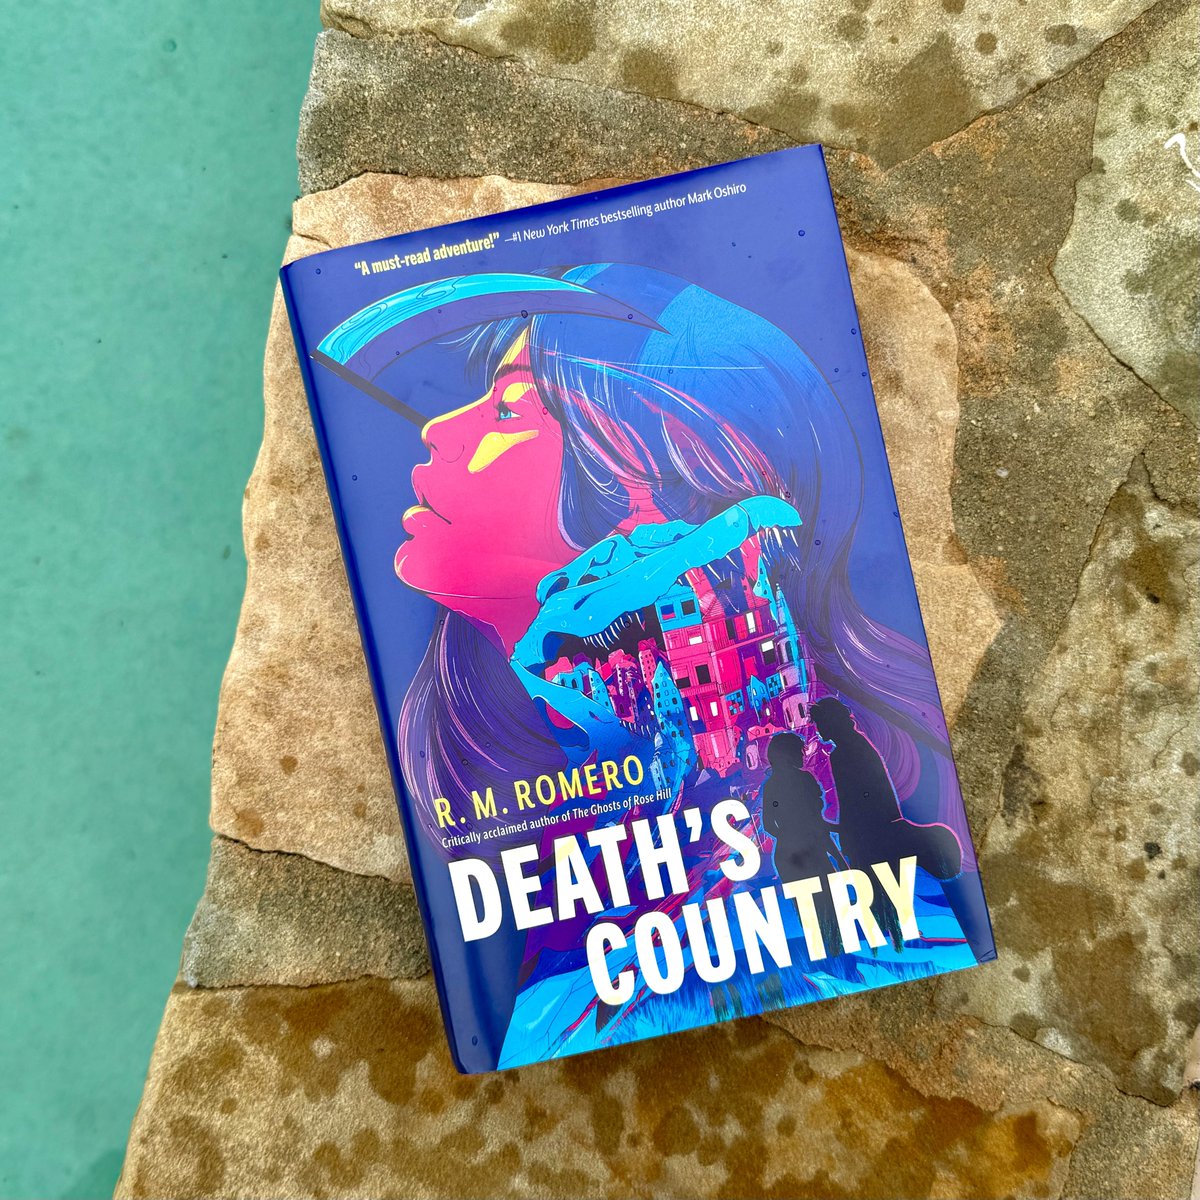 ★ 'An alluring and lyrical journey.” — @KirkusReviews DEATH'S COUNTRY has been out for one week! Have you journeyed to the underworld yet? peachtreebooks.com/book/deaths-co…